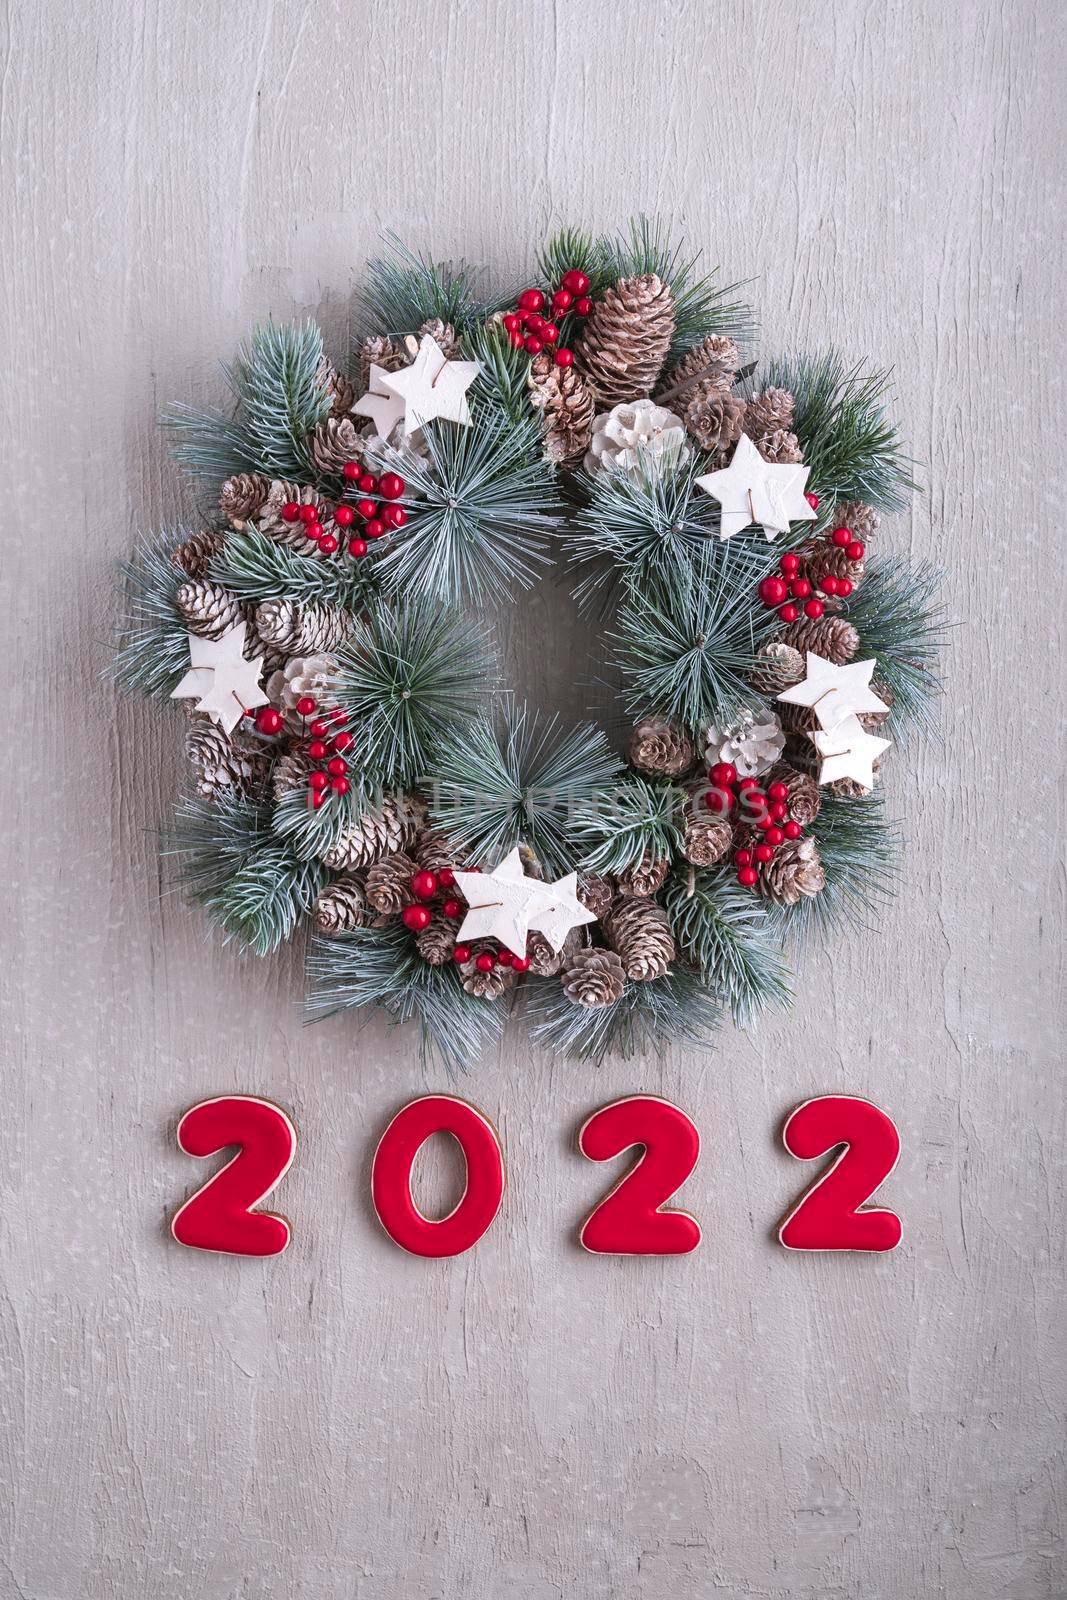 New Year decor with numbers 2022. Christmas wreath. Winter Holiday pattern. Light gray wall on background. Vertical frame.